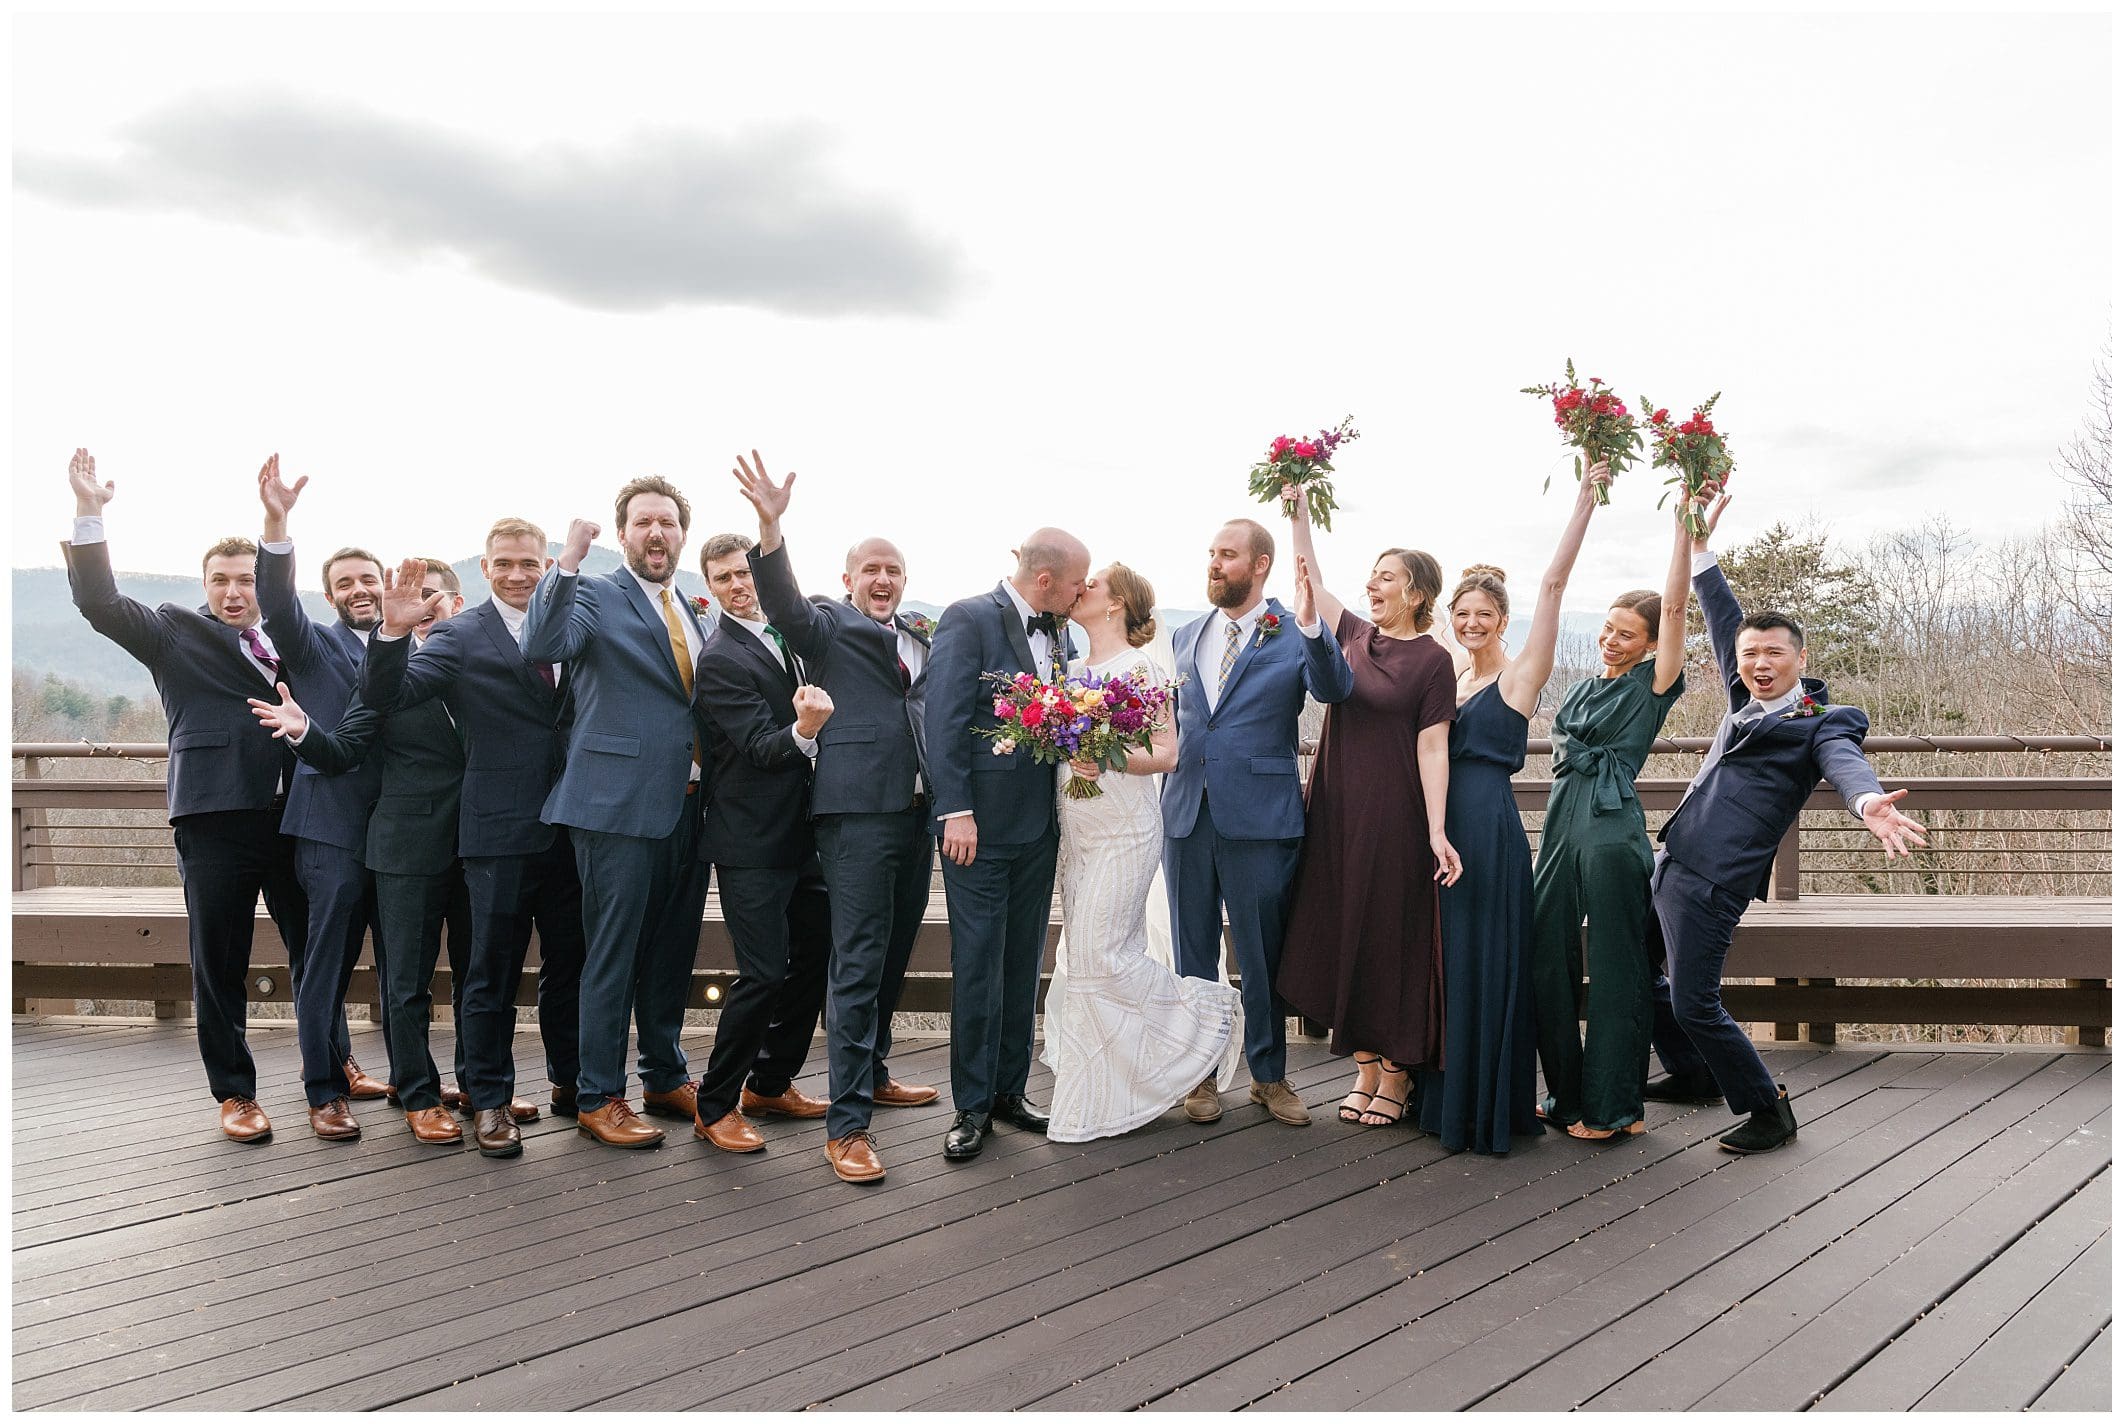 A group of bridesmaids and groomsmen pose for a photo on a deck.